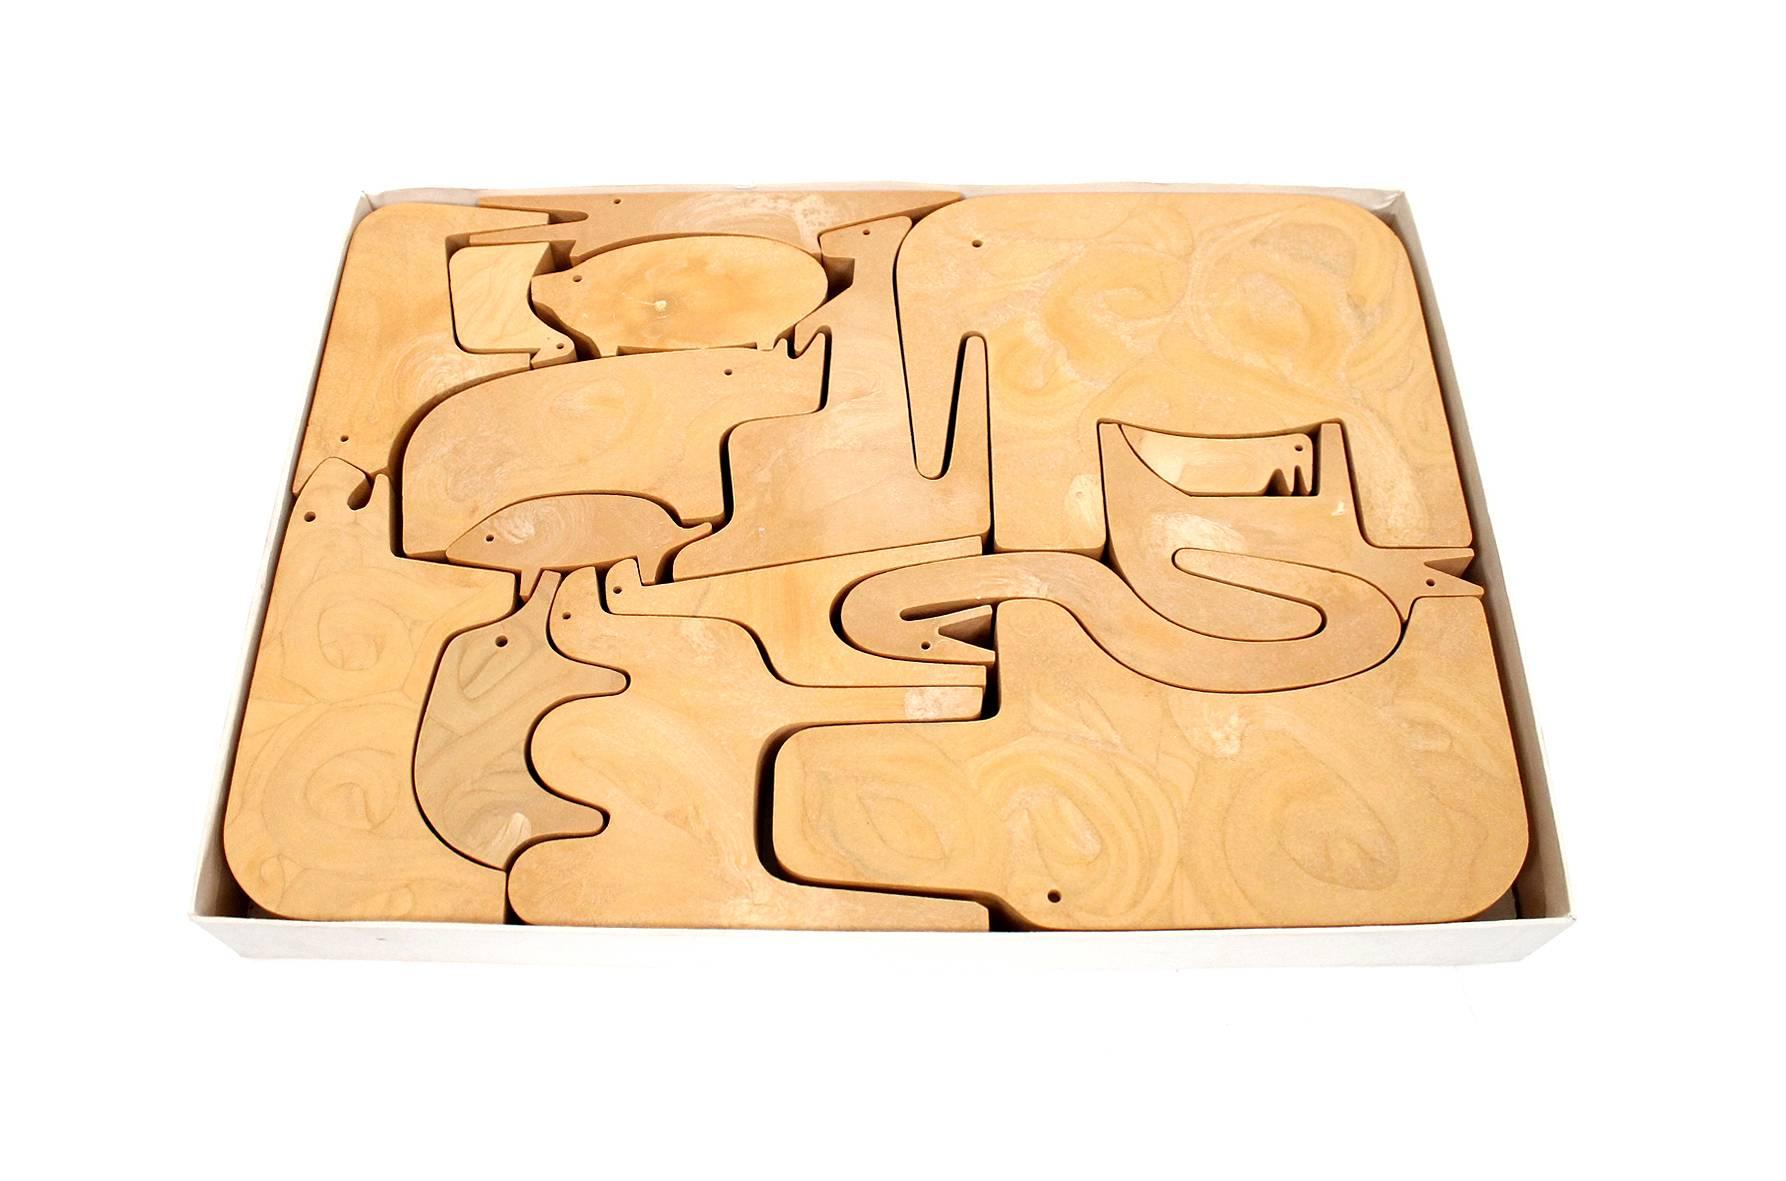 Two puzzles designed by noted Italian designer Enzo Mari for Danese. One in resin with its original box and the other smaller puzzle in the rare teak variation.  Fun and playful animal designs. Priced individually. Dimensions below are for resin